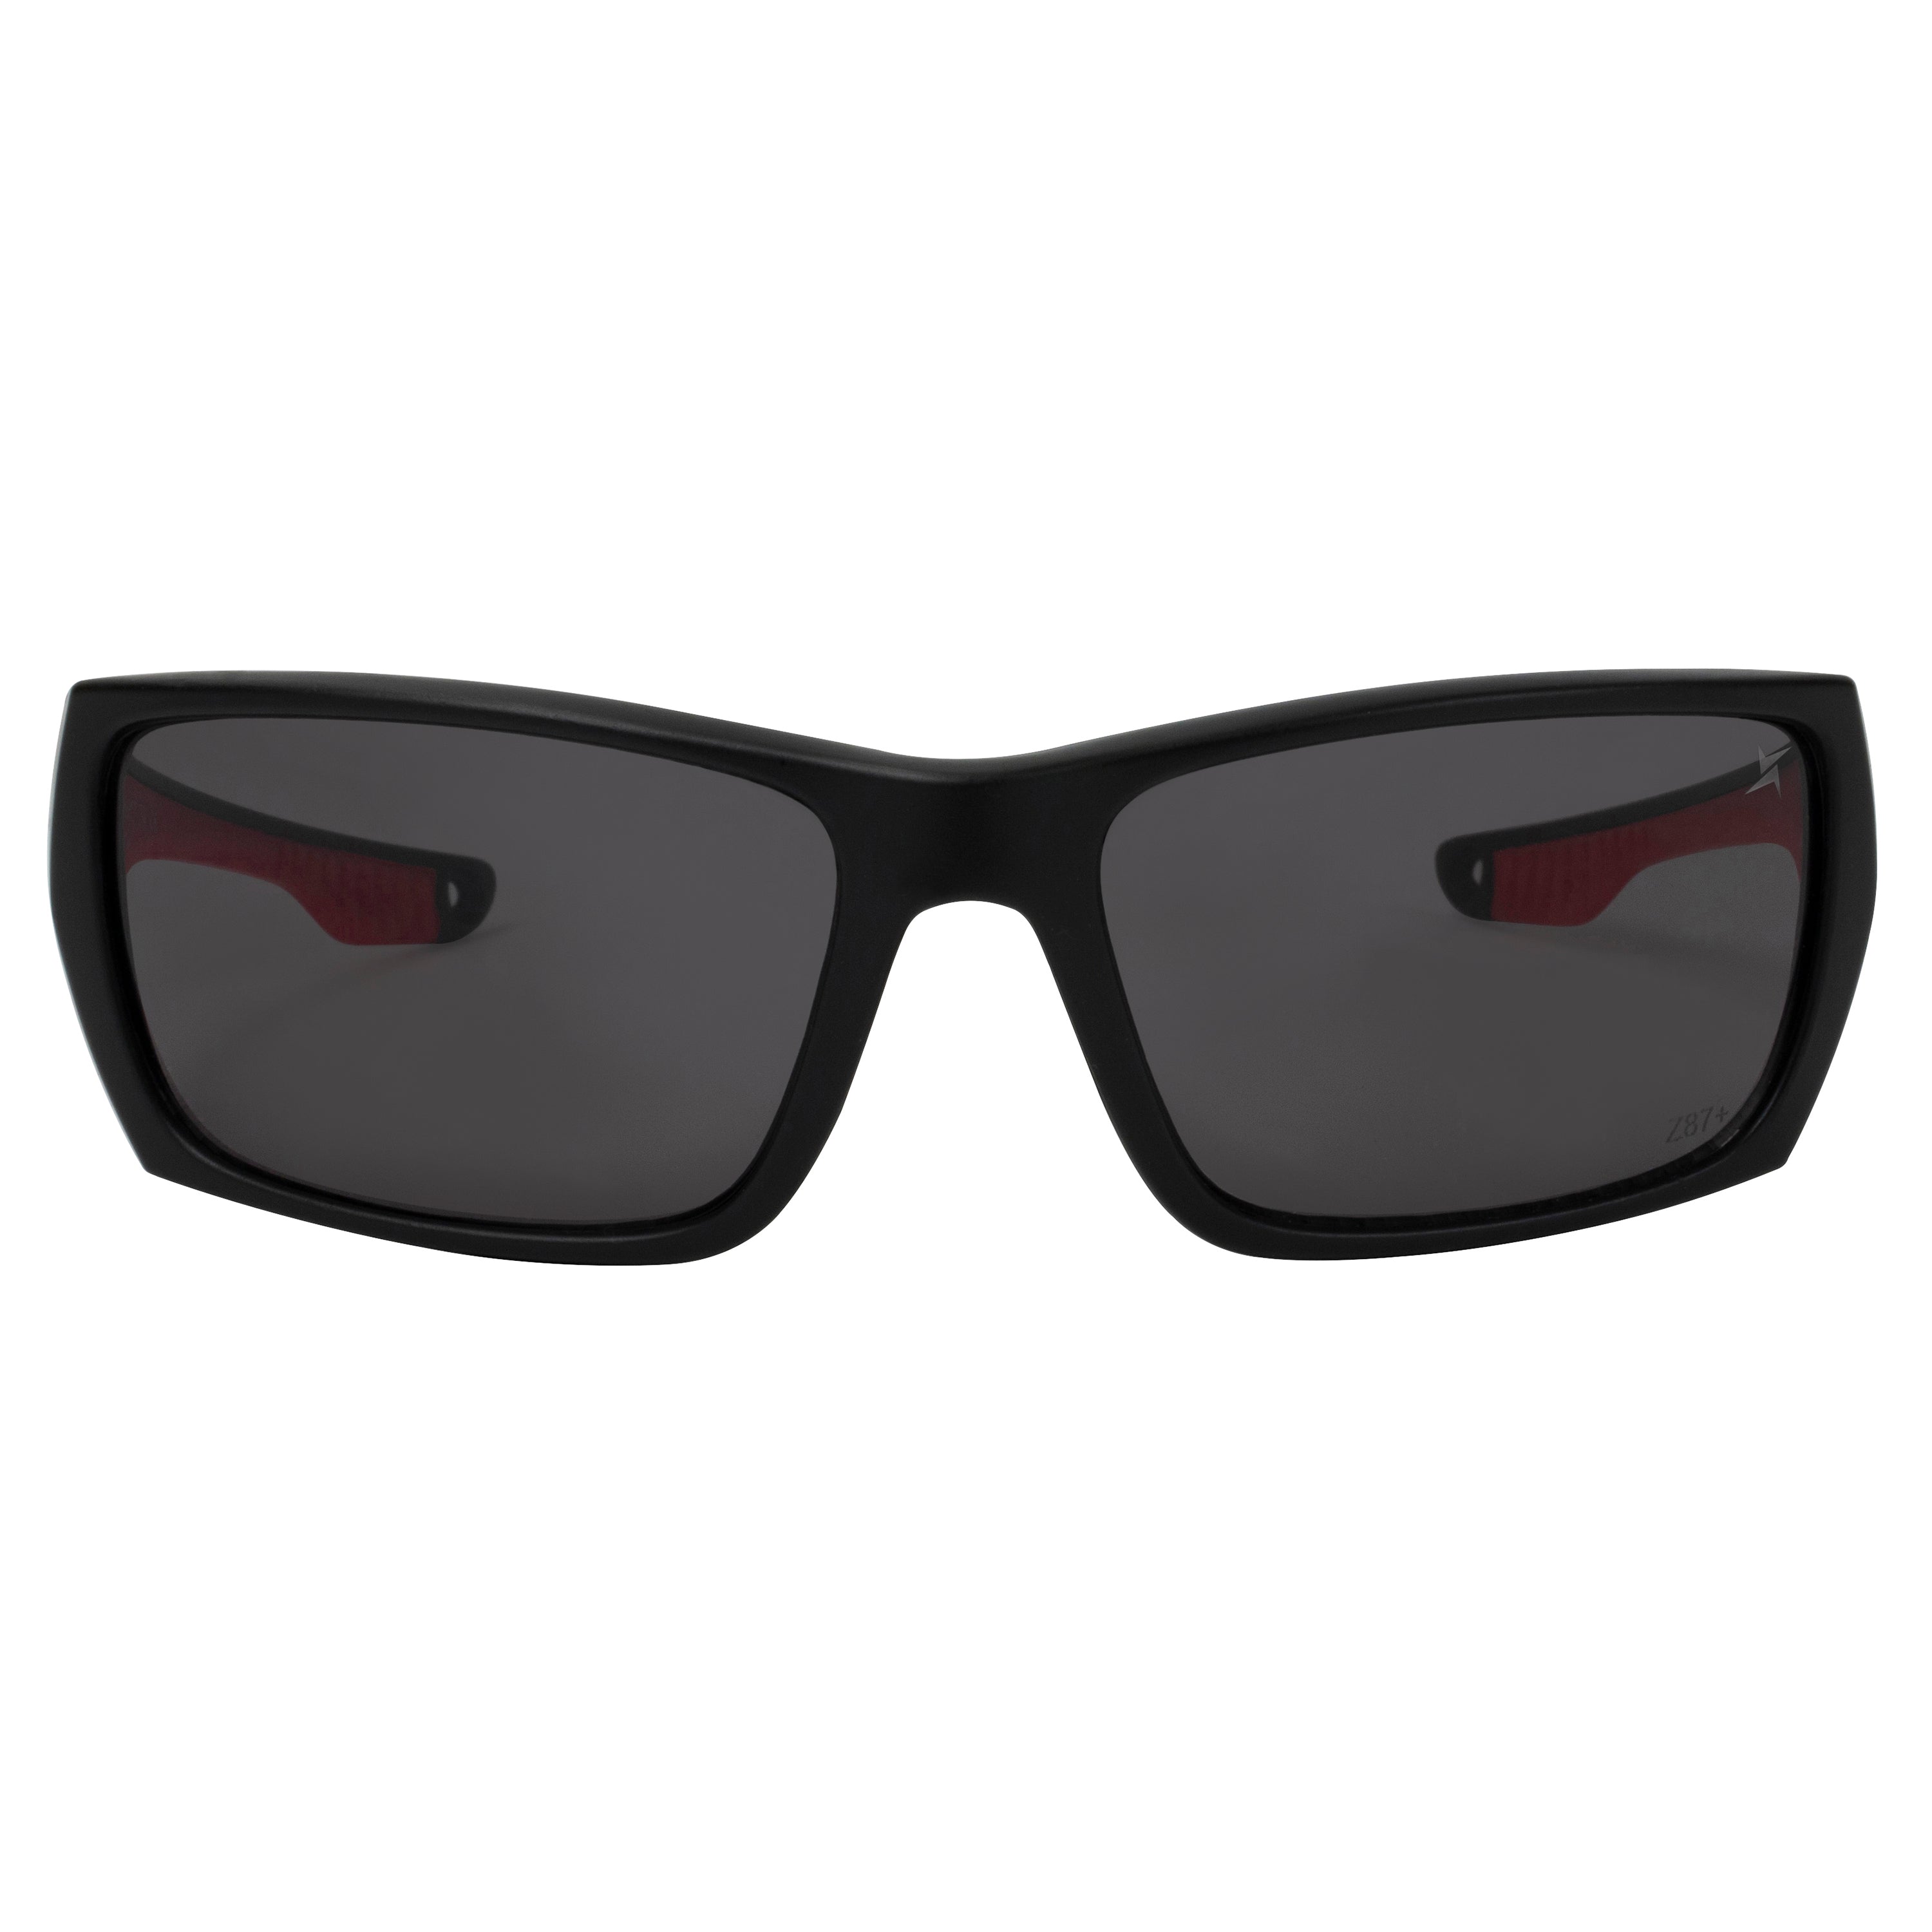 Dark Smoke Lens Sport Safety Sunglasses with Red Rubber Accents.